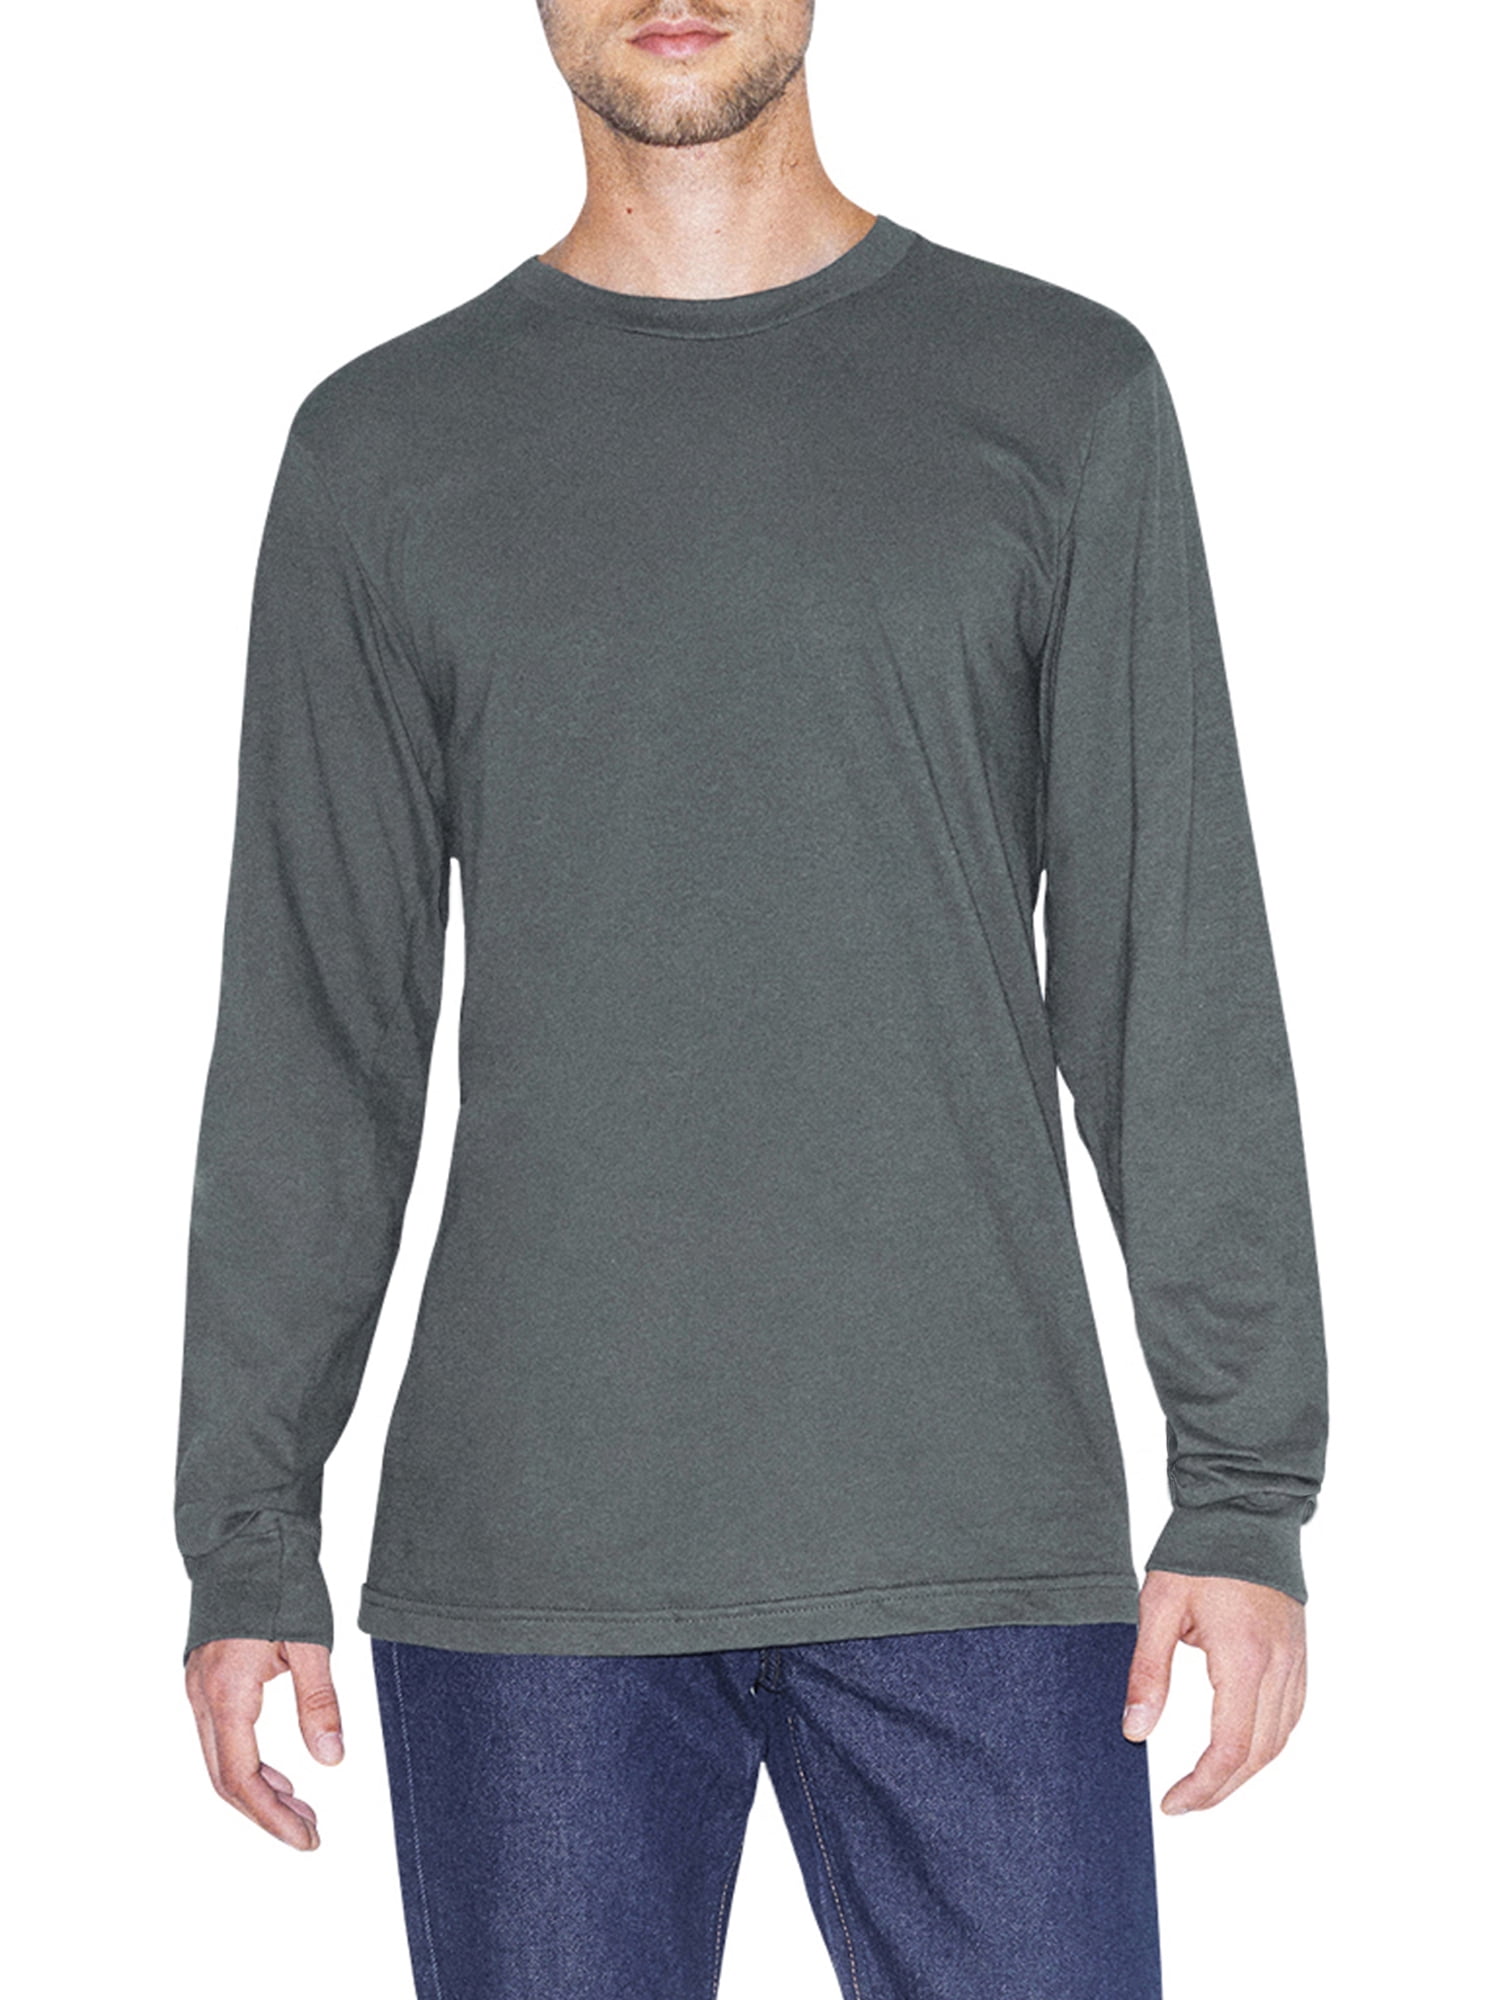 Duofold Mens Mid Weight Crew Neck Thermal Sleepwear 